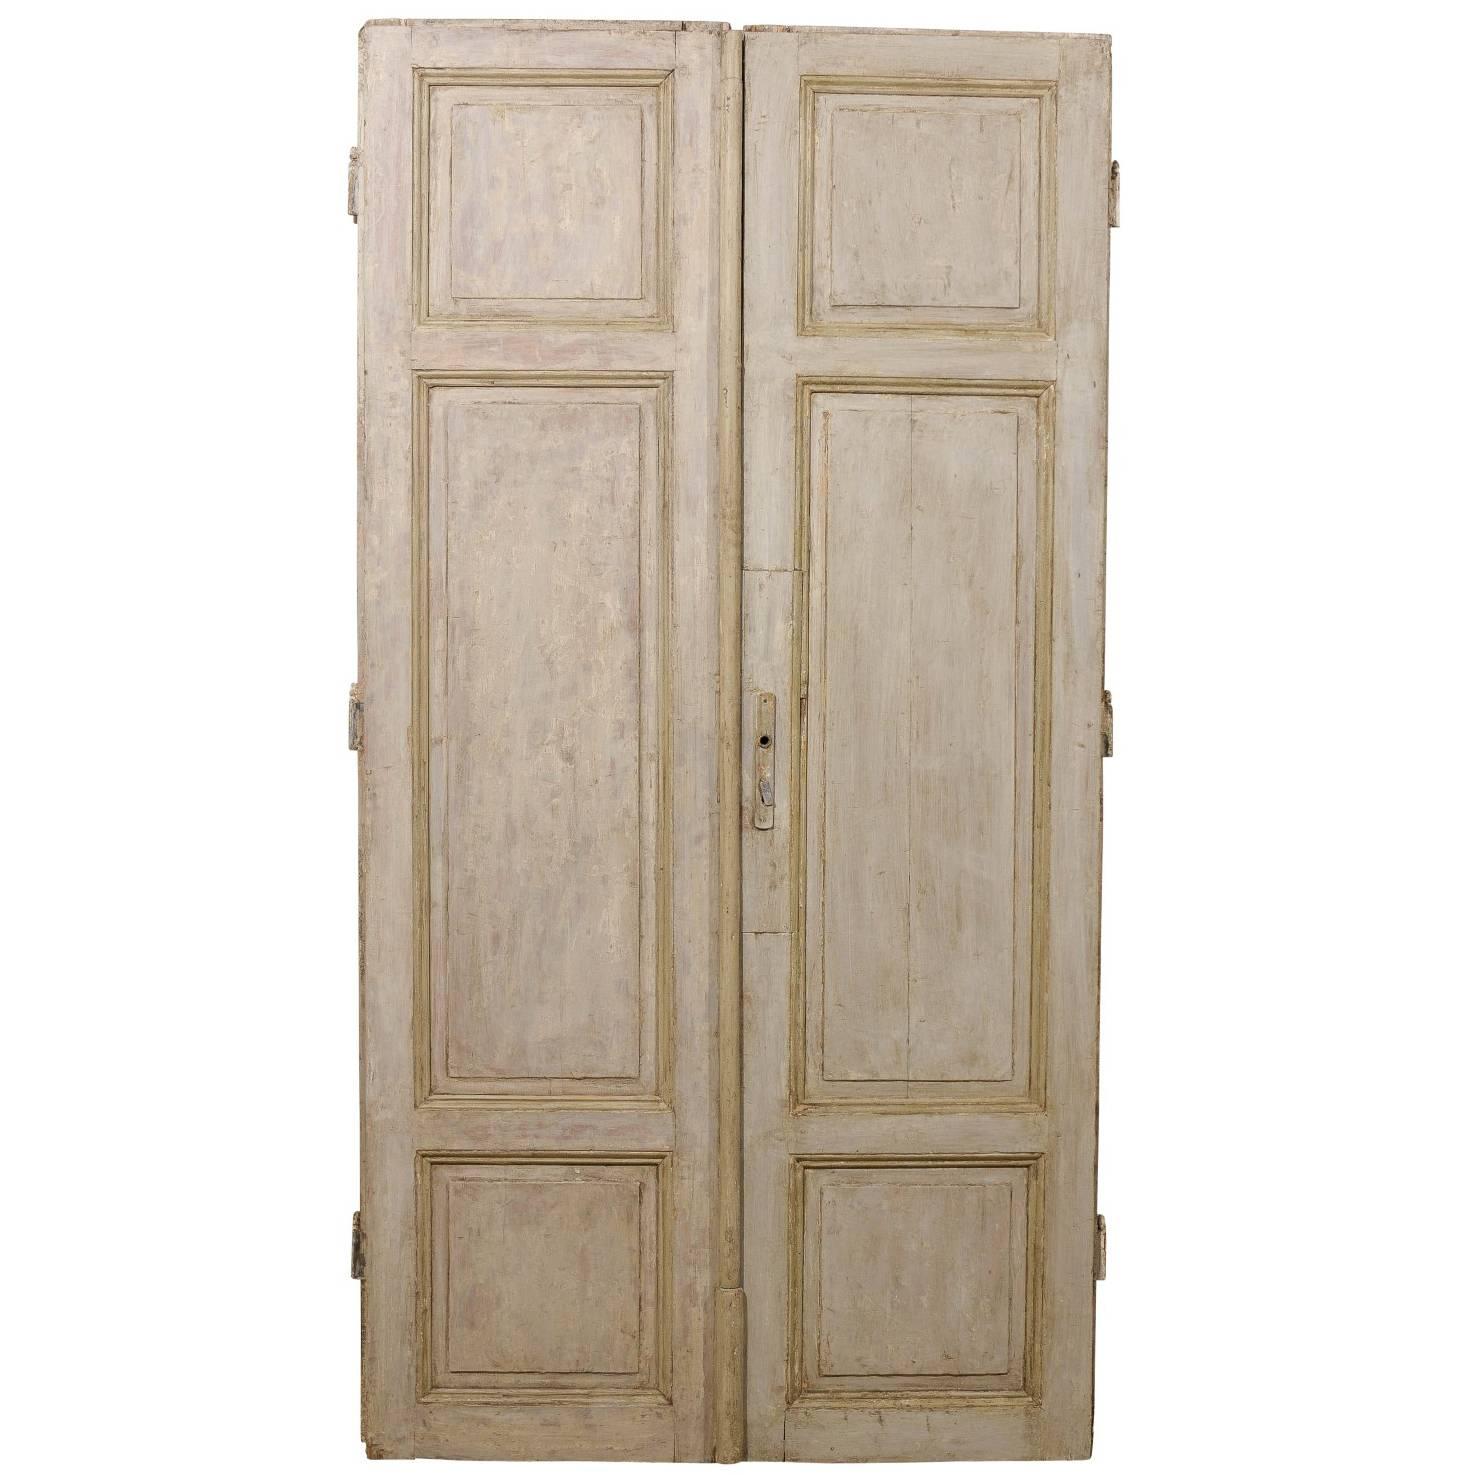 Pair of Tall French Doors from the Mid-19th Century with Grey Green Finish For Sale